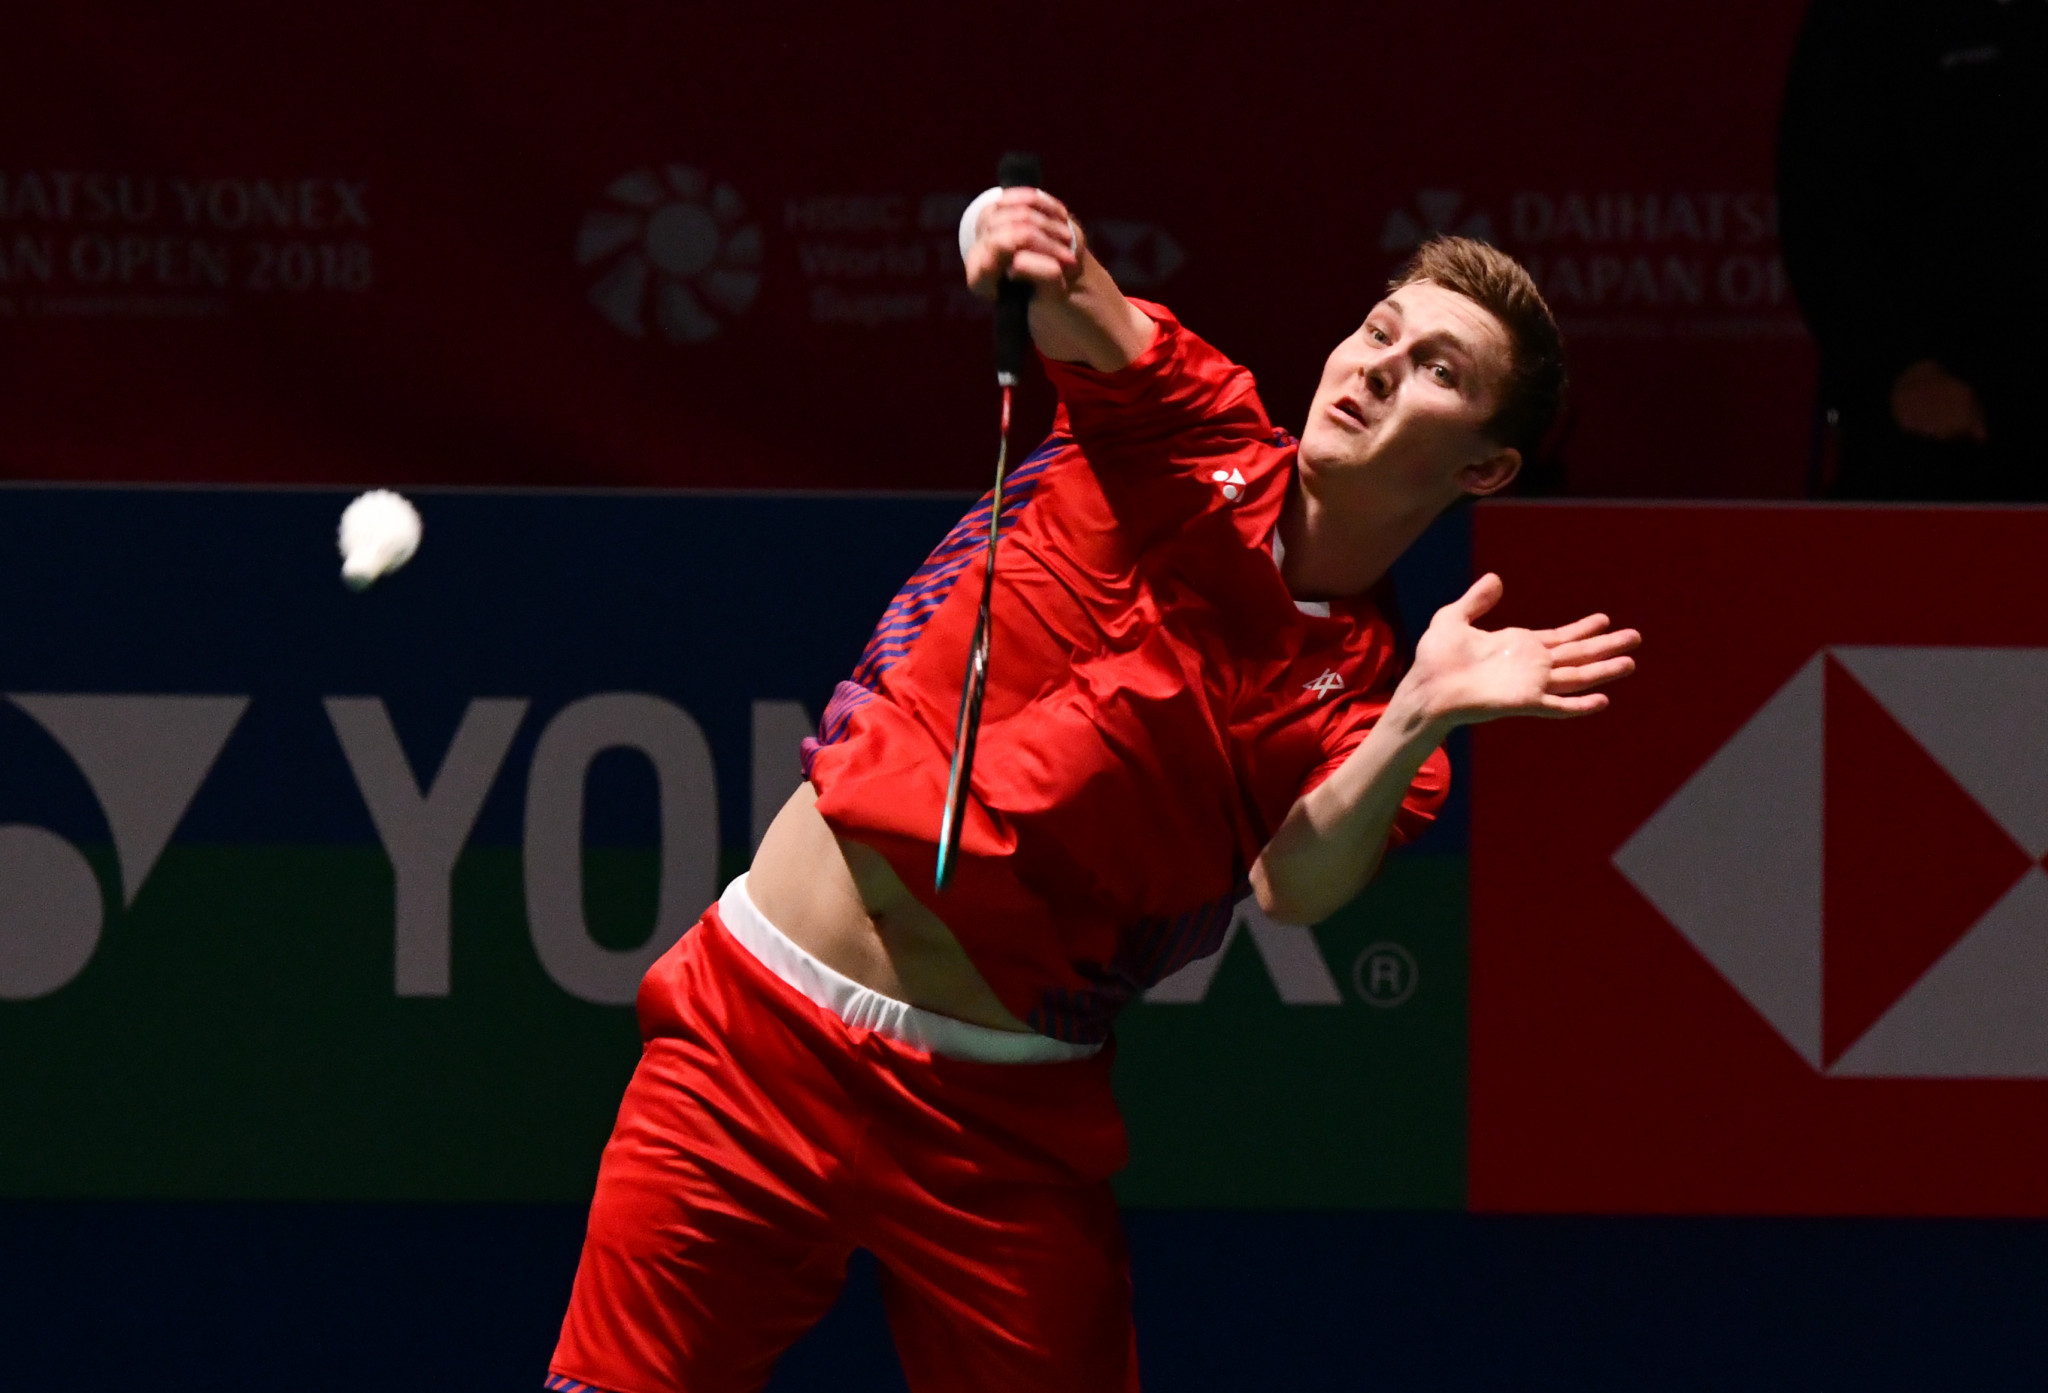 Home favourite Viktor Axelsen opened his bid to claim the BWF Denmark Open title for the first time by registering a straight-games win over Japan’s Kazumasa Sakai in Odense today ©Getty Images